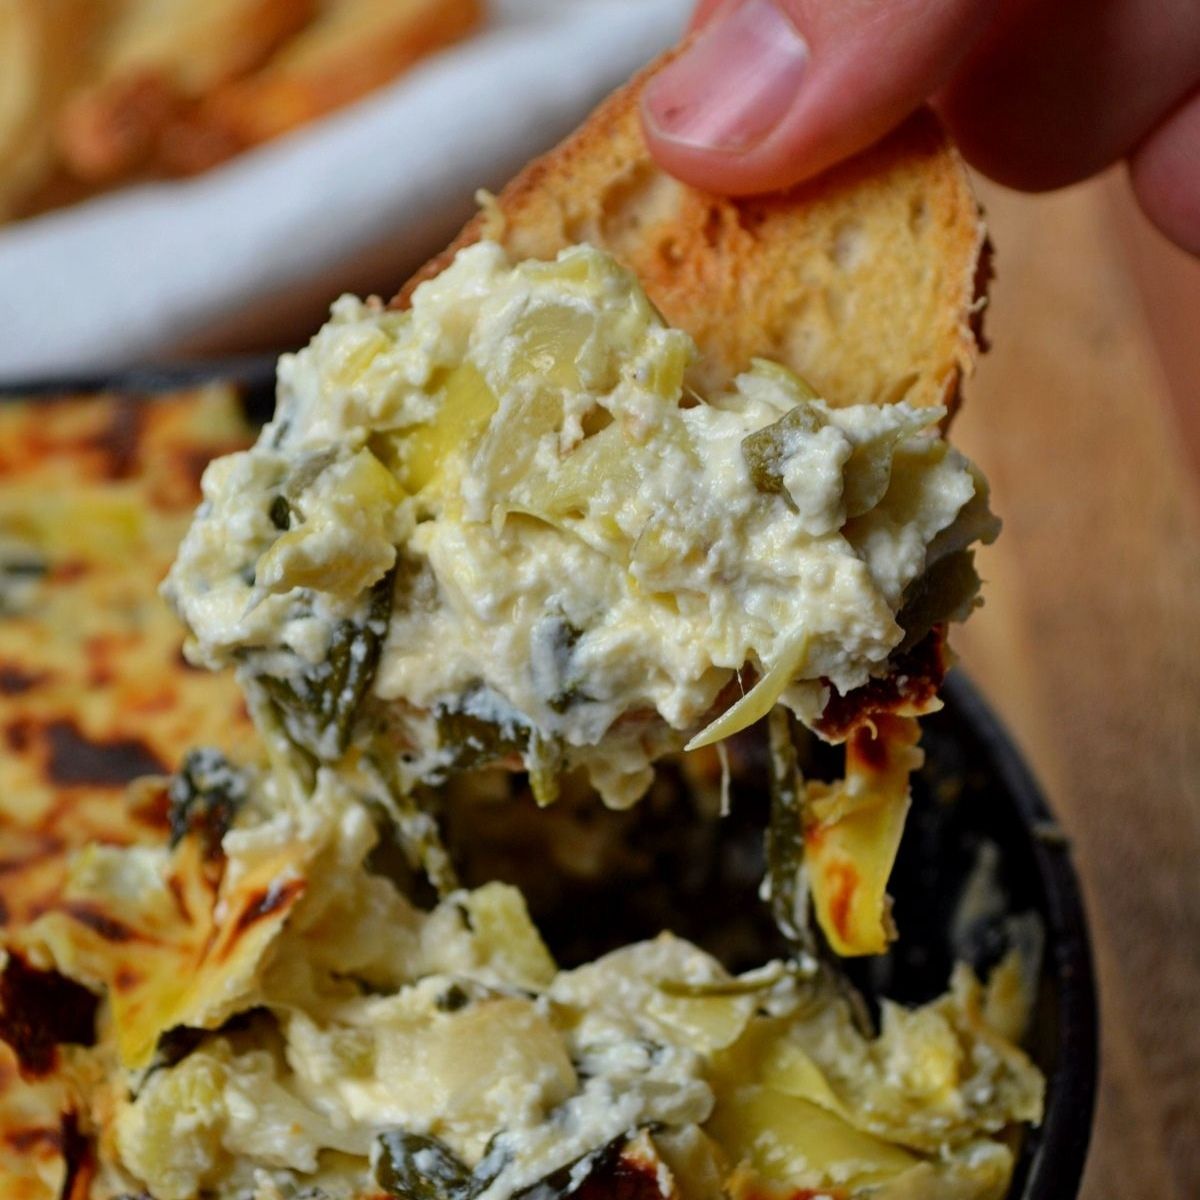 Spinach and artichoke dip in a skillet with bread taking a scoop.